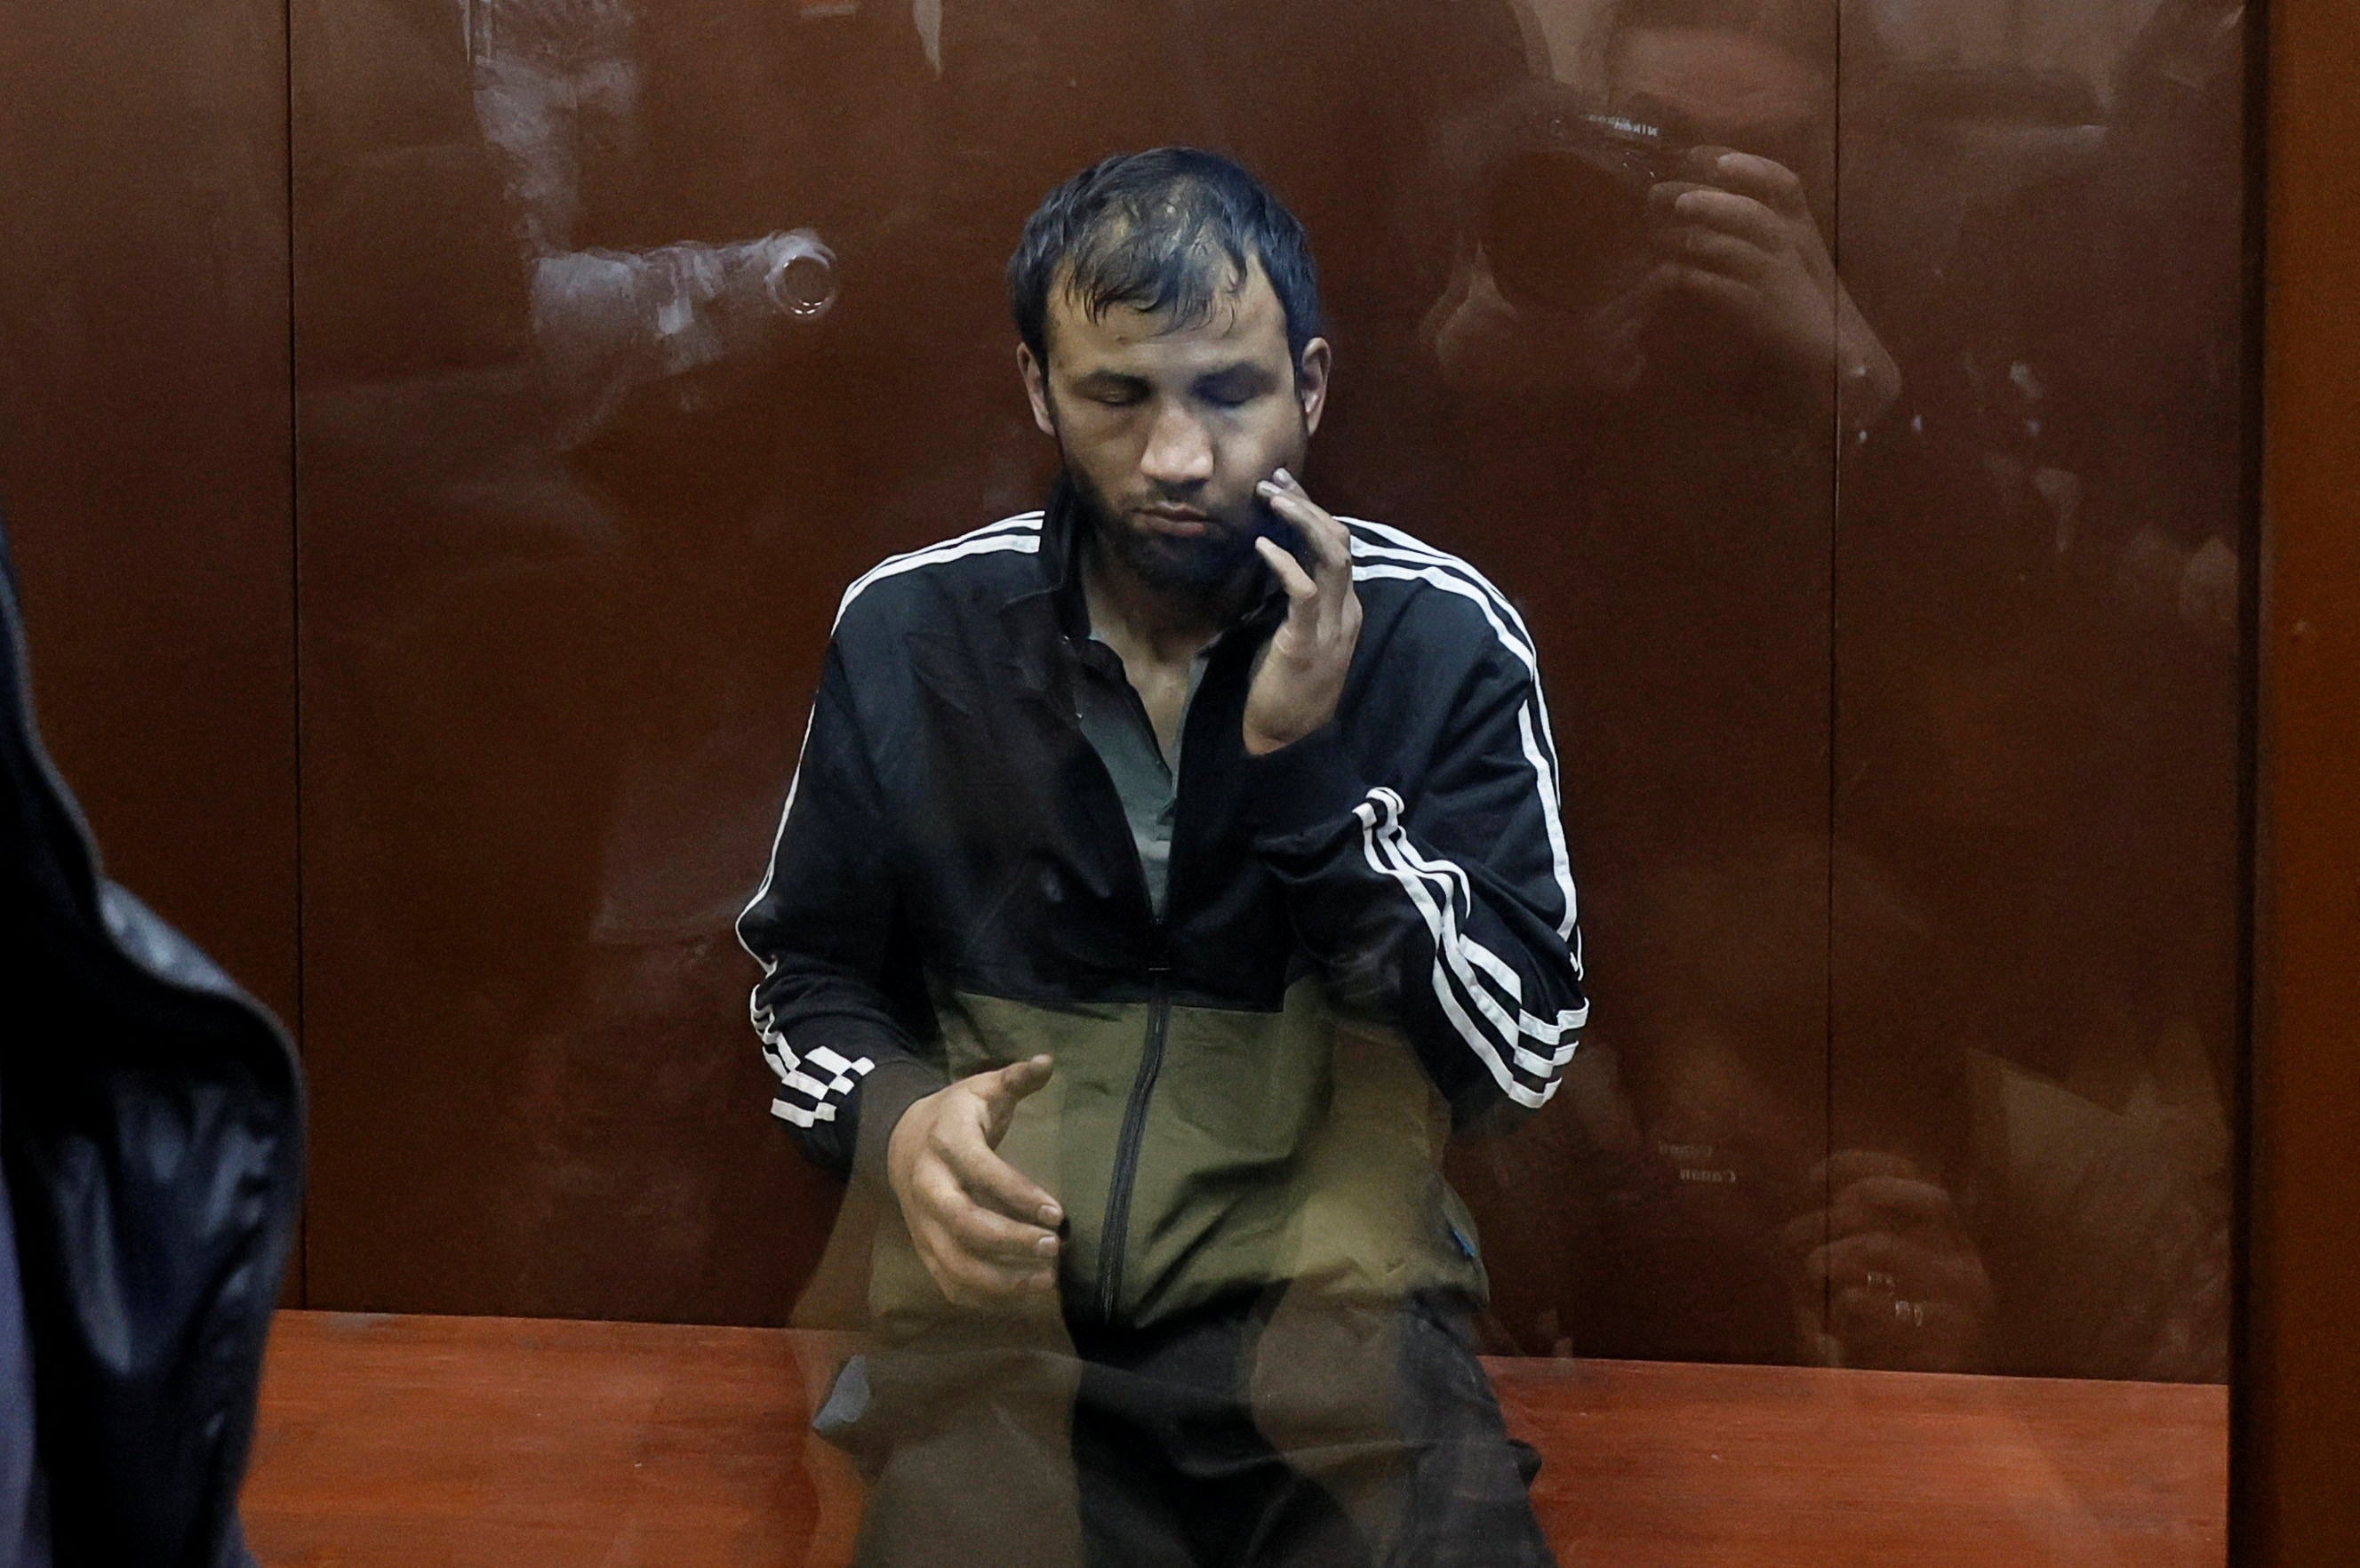 Shamsidin Fariduni, a suspect in the shooting attack at the Crocus City Hall concert venue, sits behind a glass wall in court